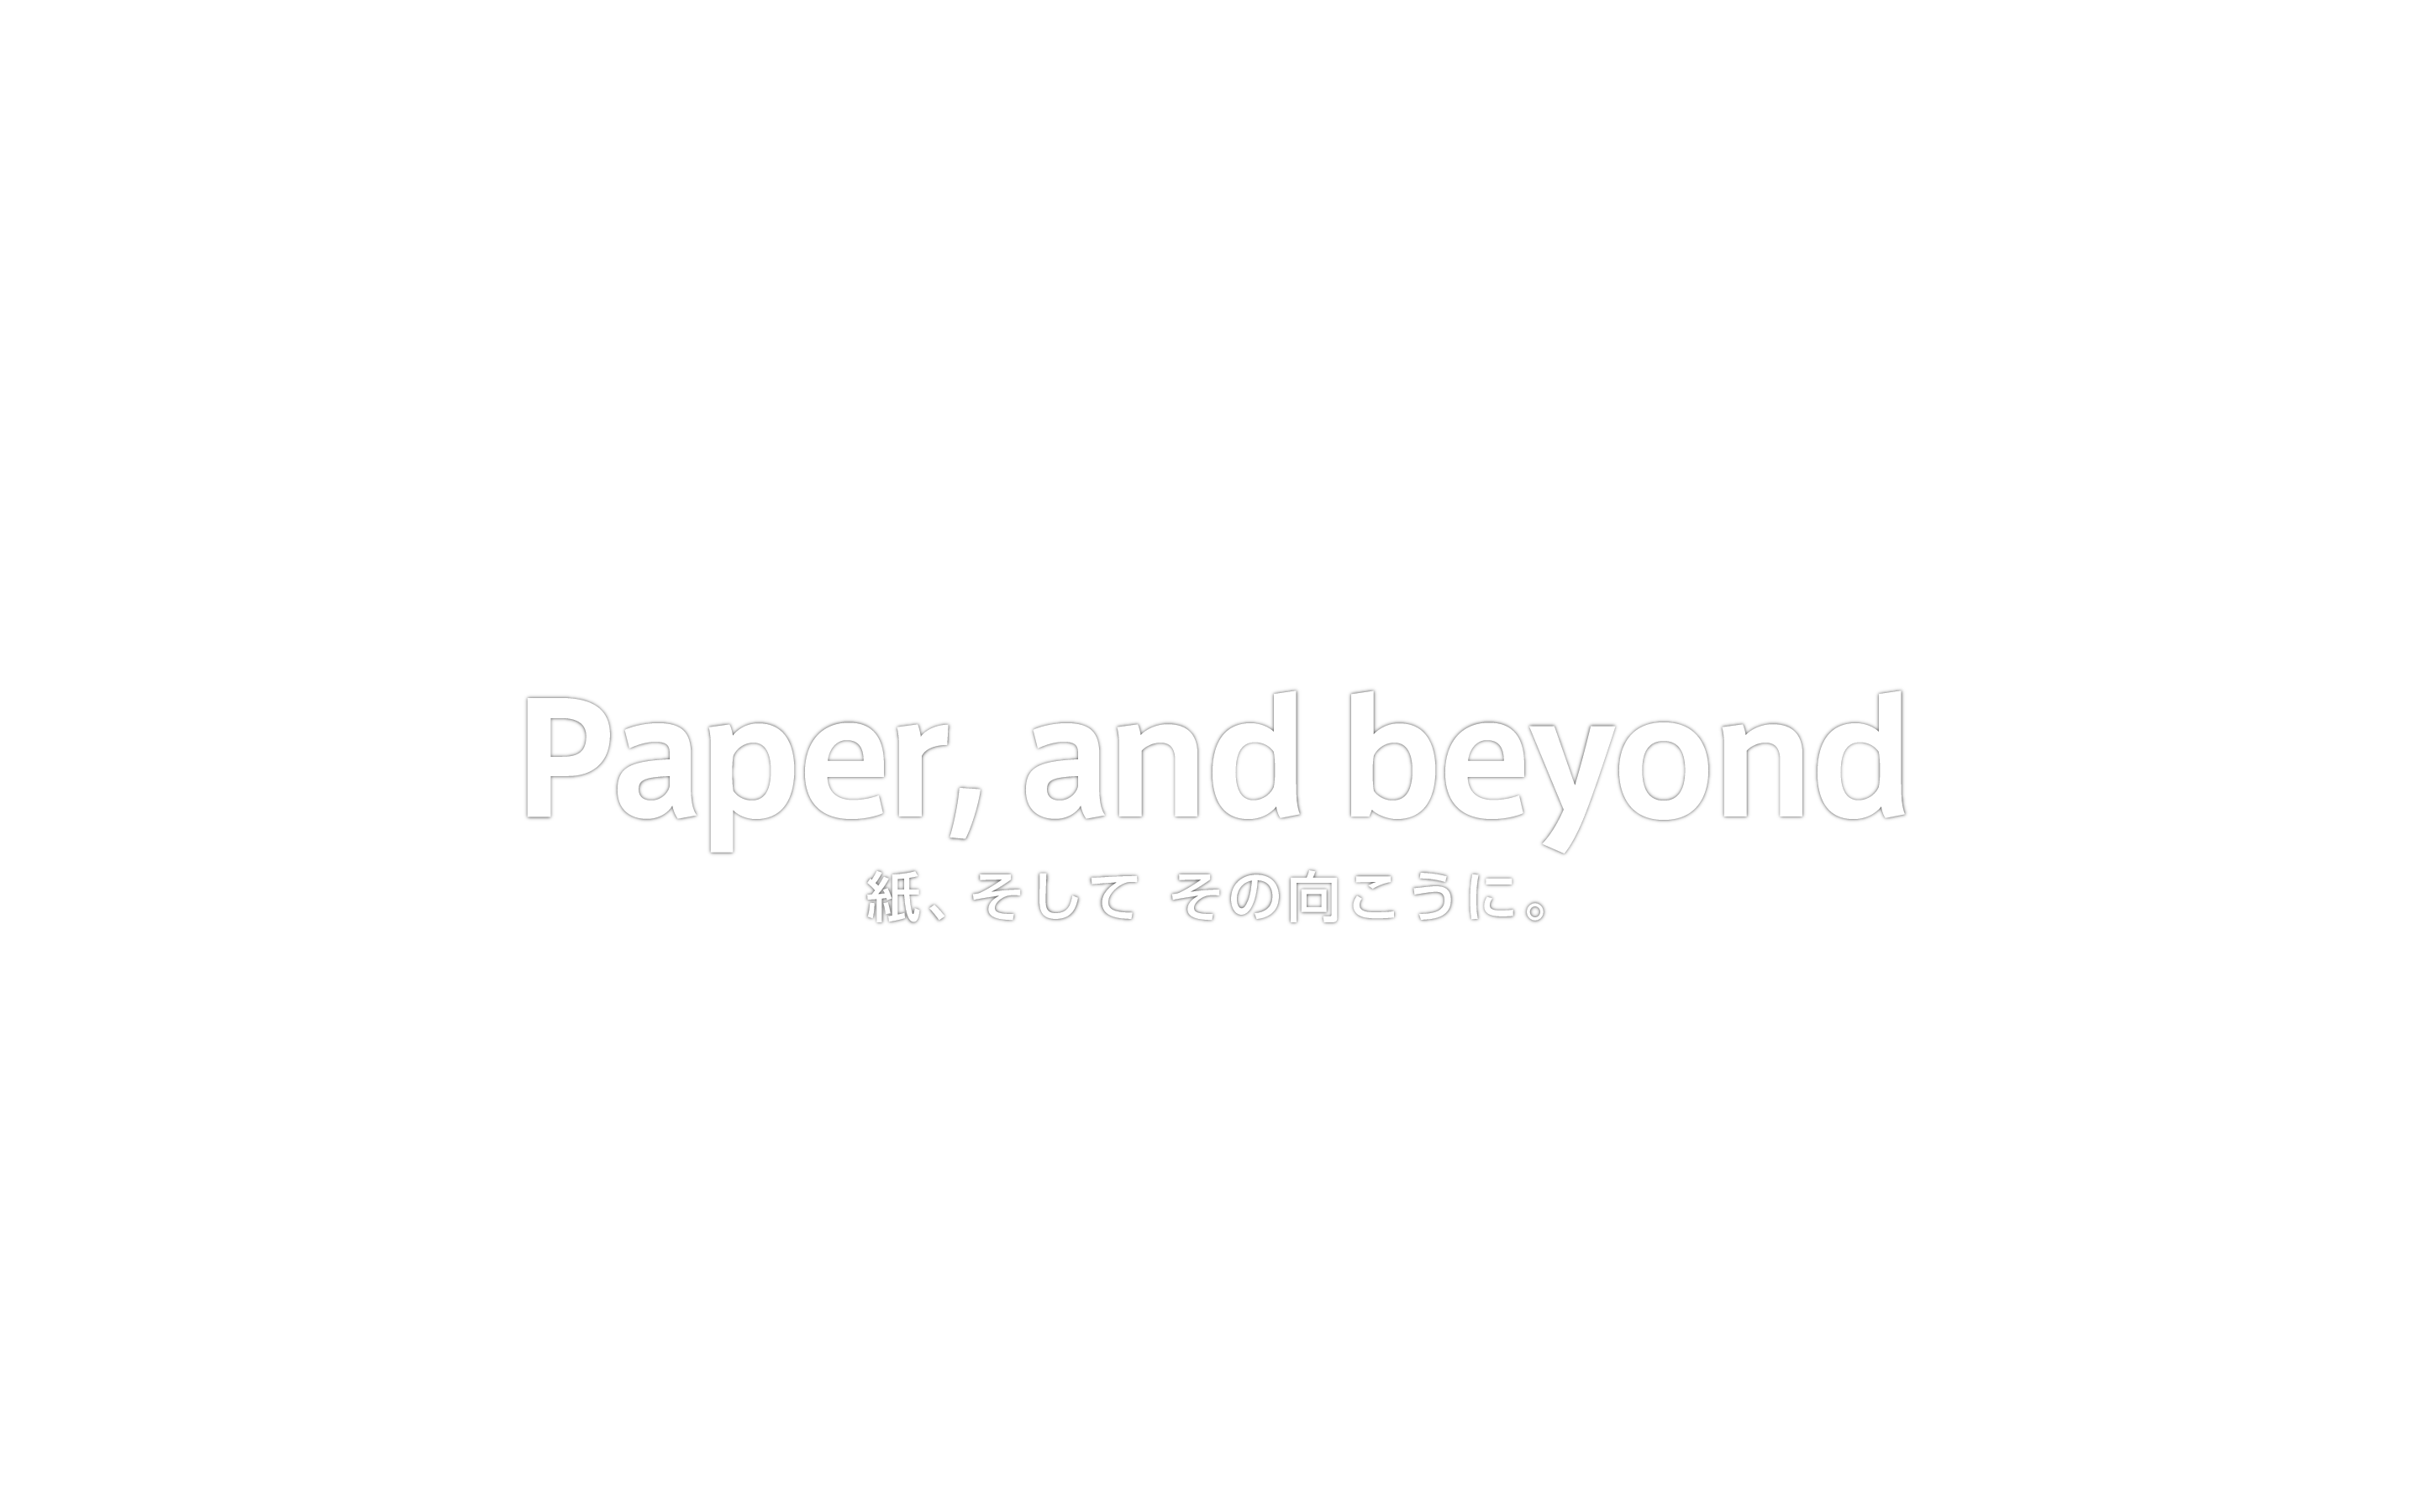 Paper, and beyond 紙、そして その向こうに。